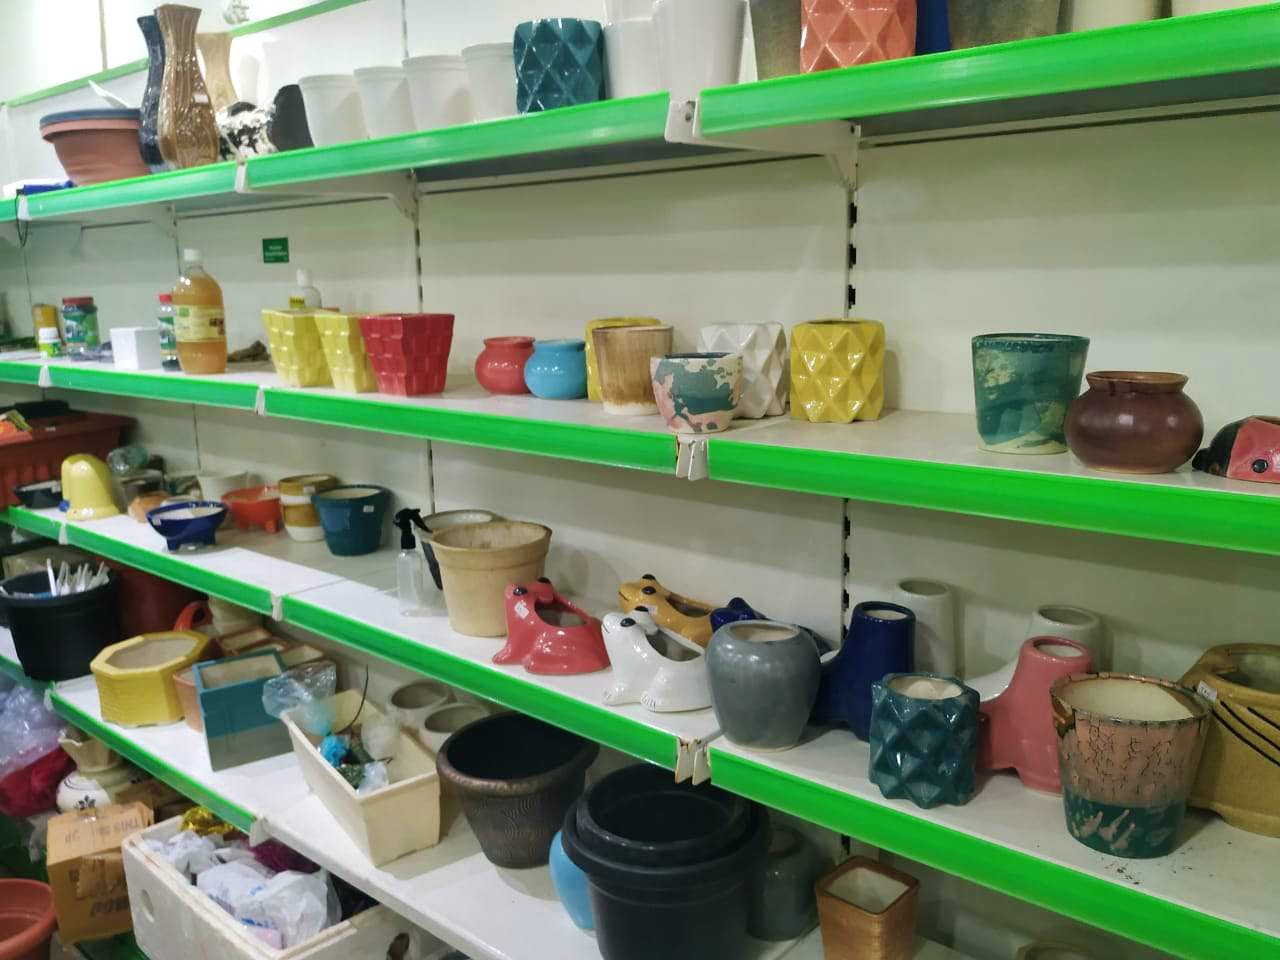 Shelf,Product,Room,Plastic,Grocery store,Furniture,Shelving,Building,Tableware,Pantry